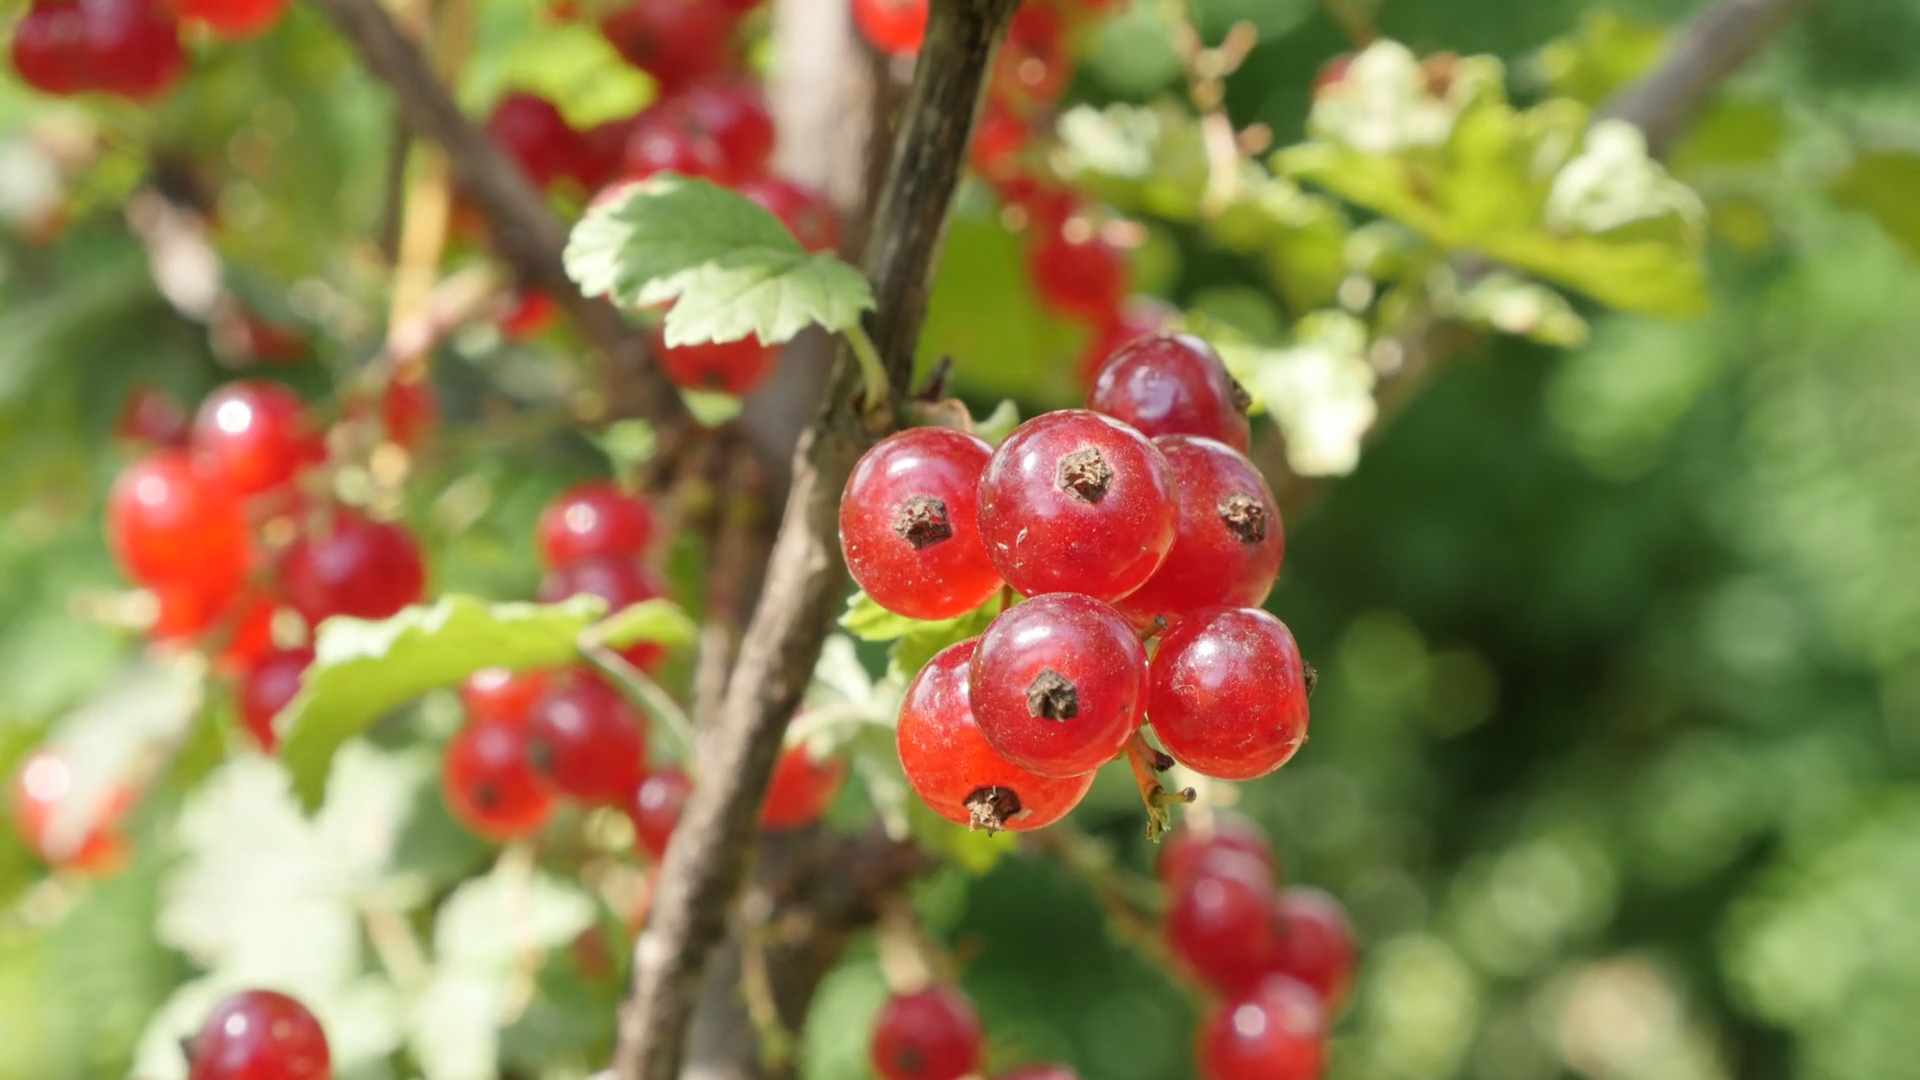 Lot of small red berries on Ribes rubrum plant natural shallow DOF ...